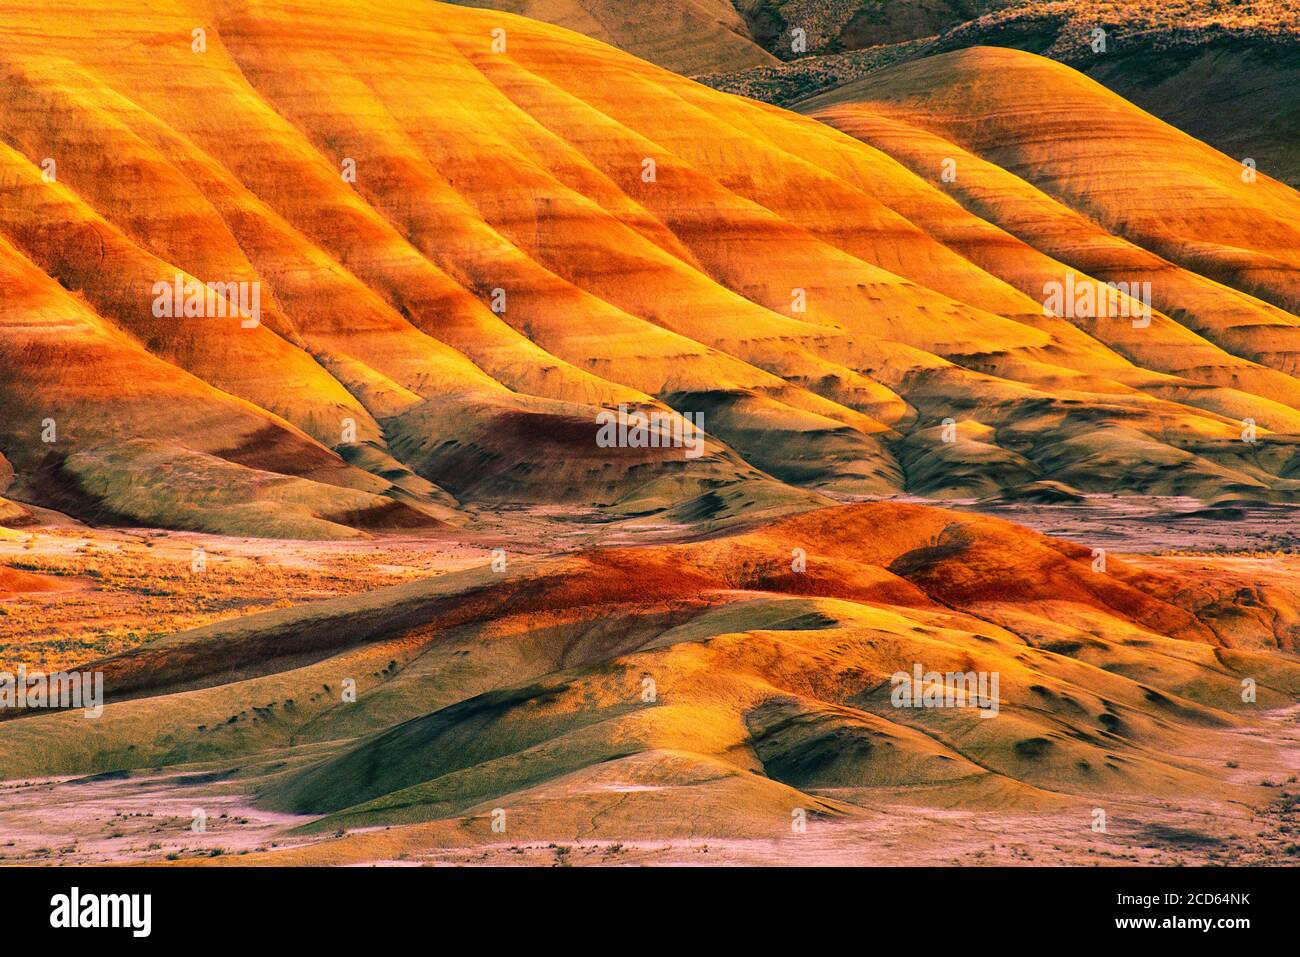 John Day Fossil Beds National Monument, Painted Hills Unit, Oregon, USA Stockfoto